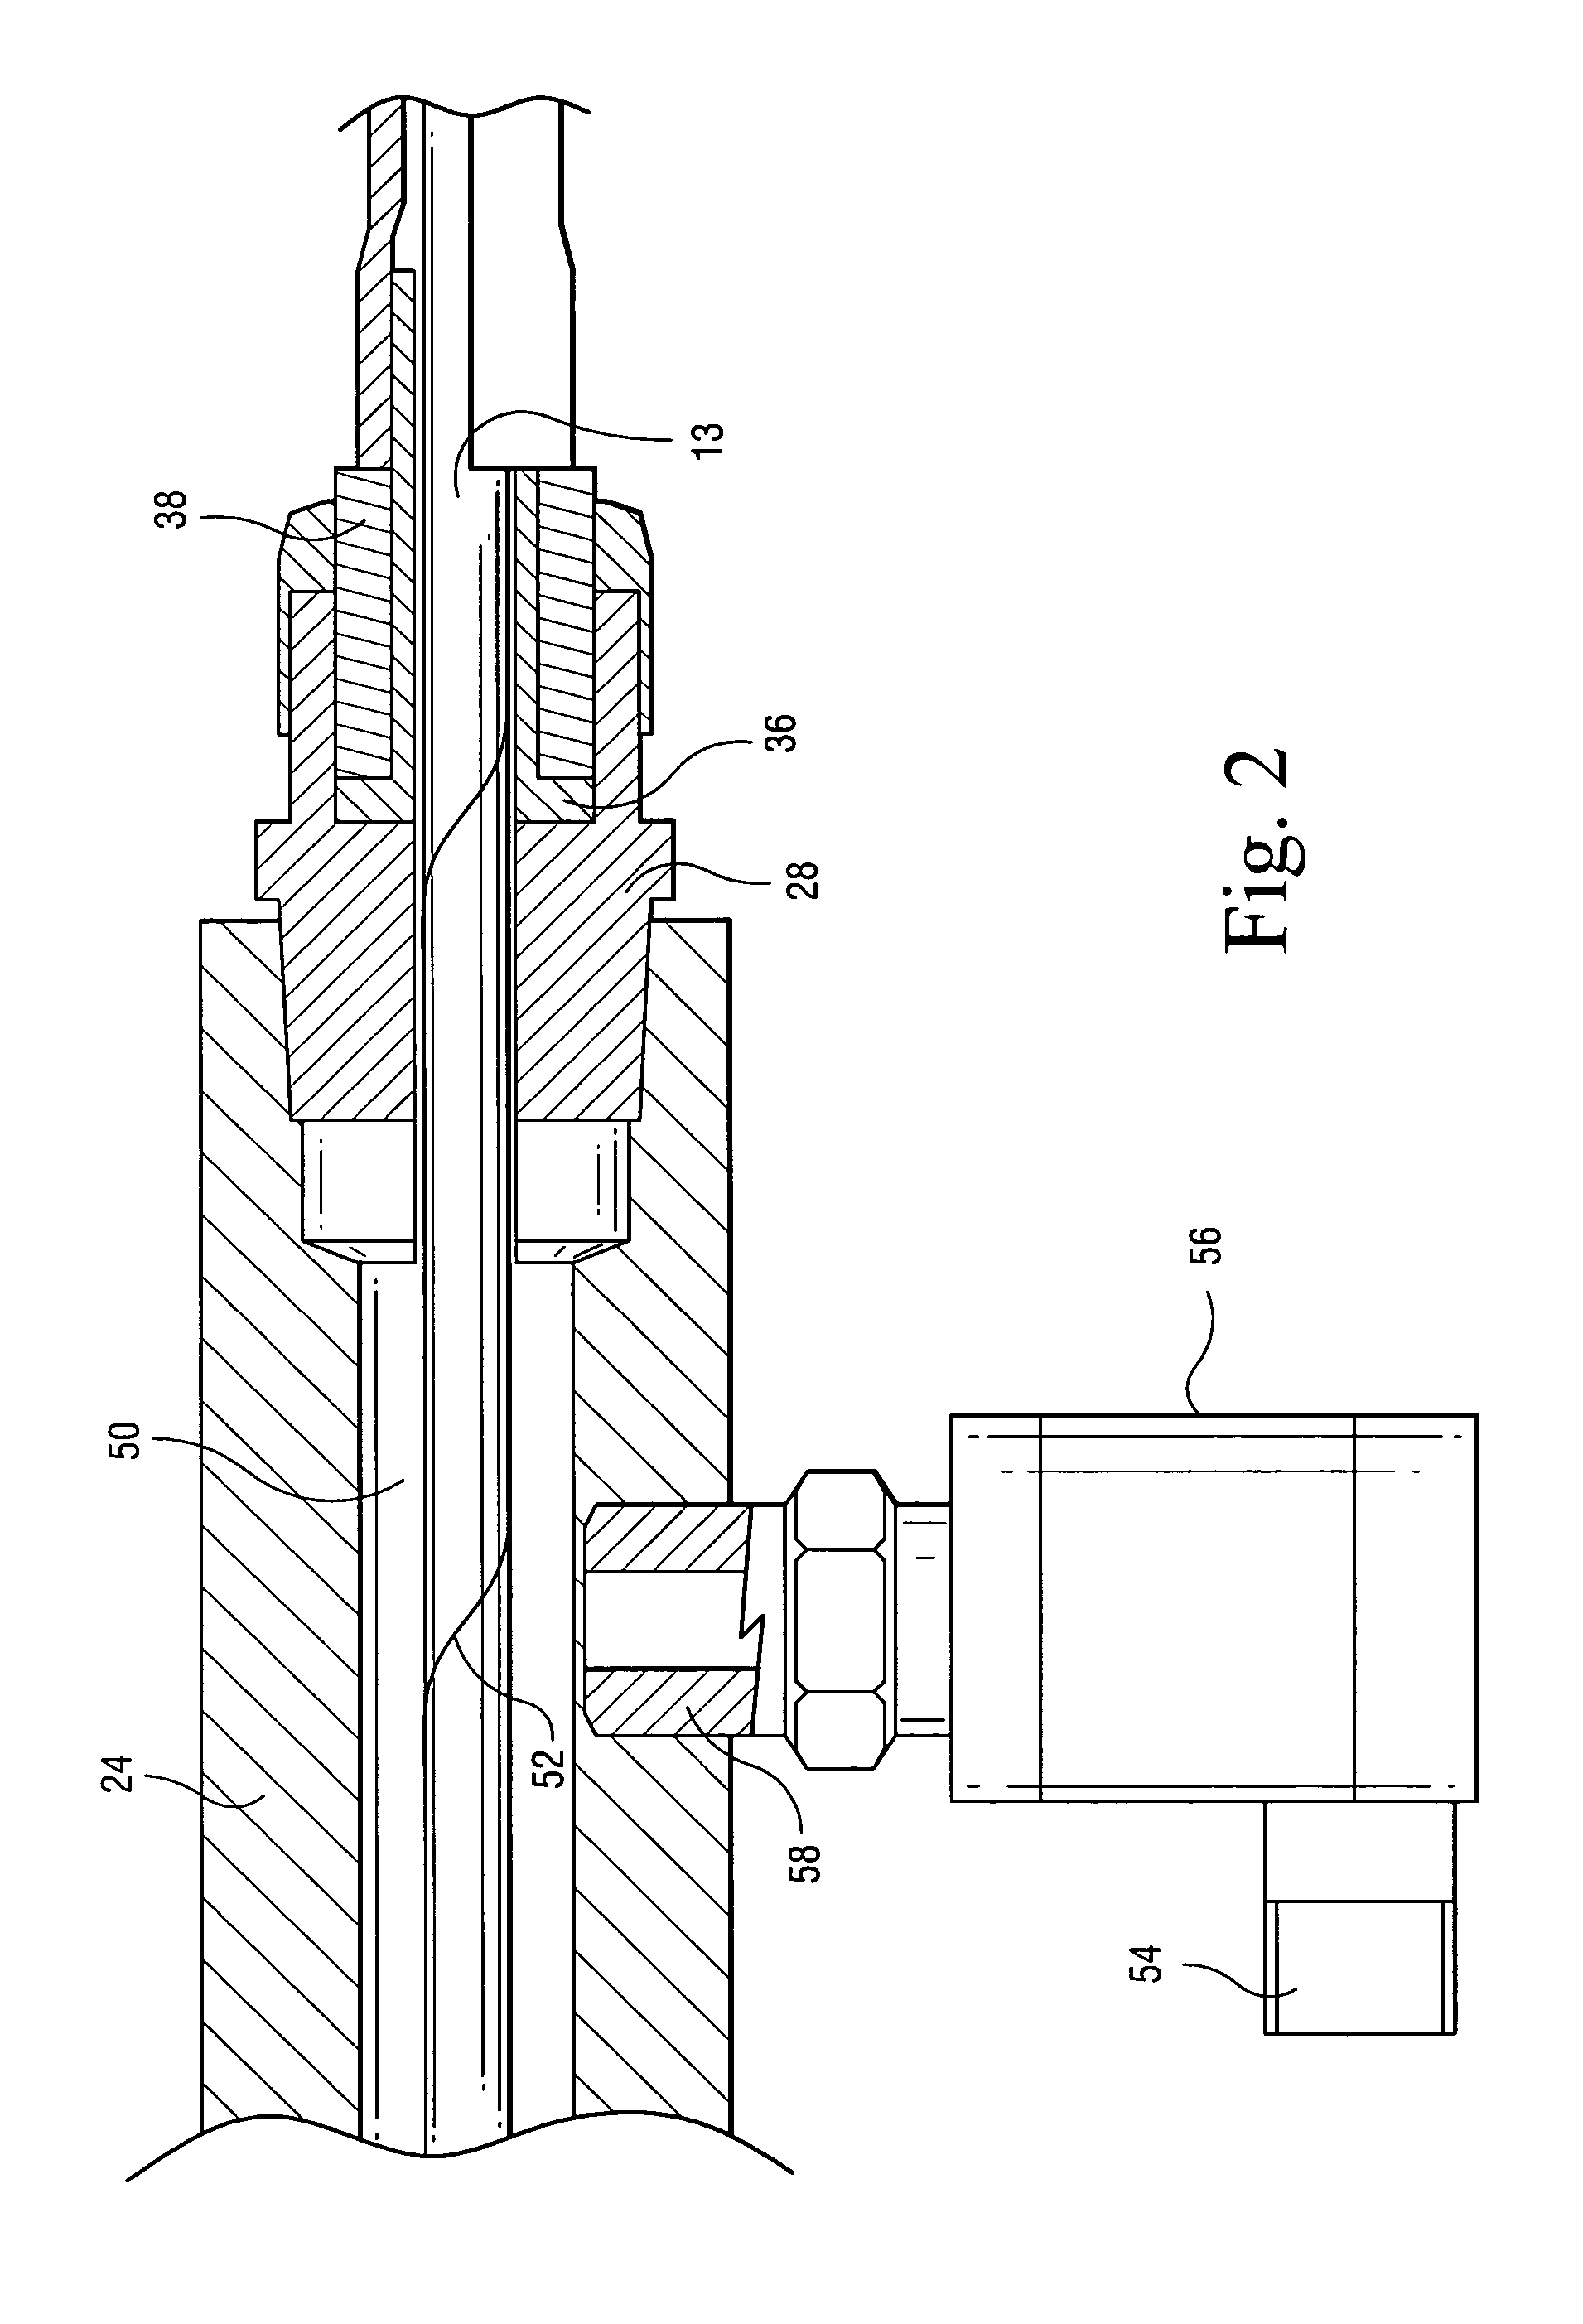 Flexible borescope assembly for inspecting internal turbine components at elevated temperatures